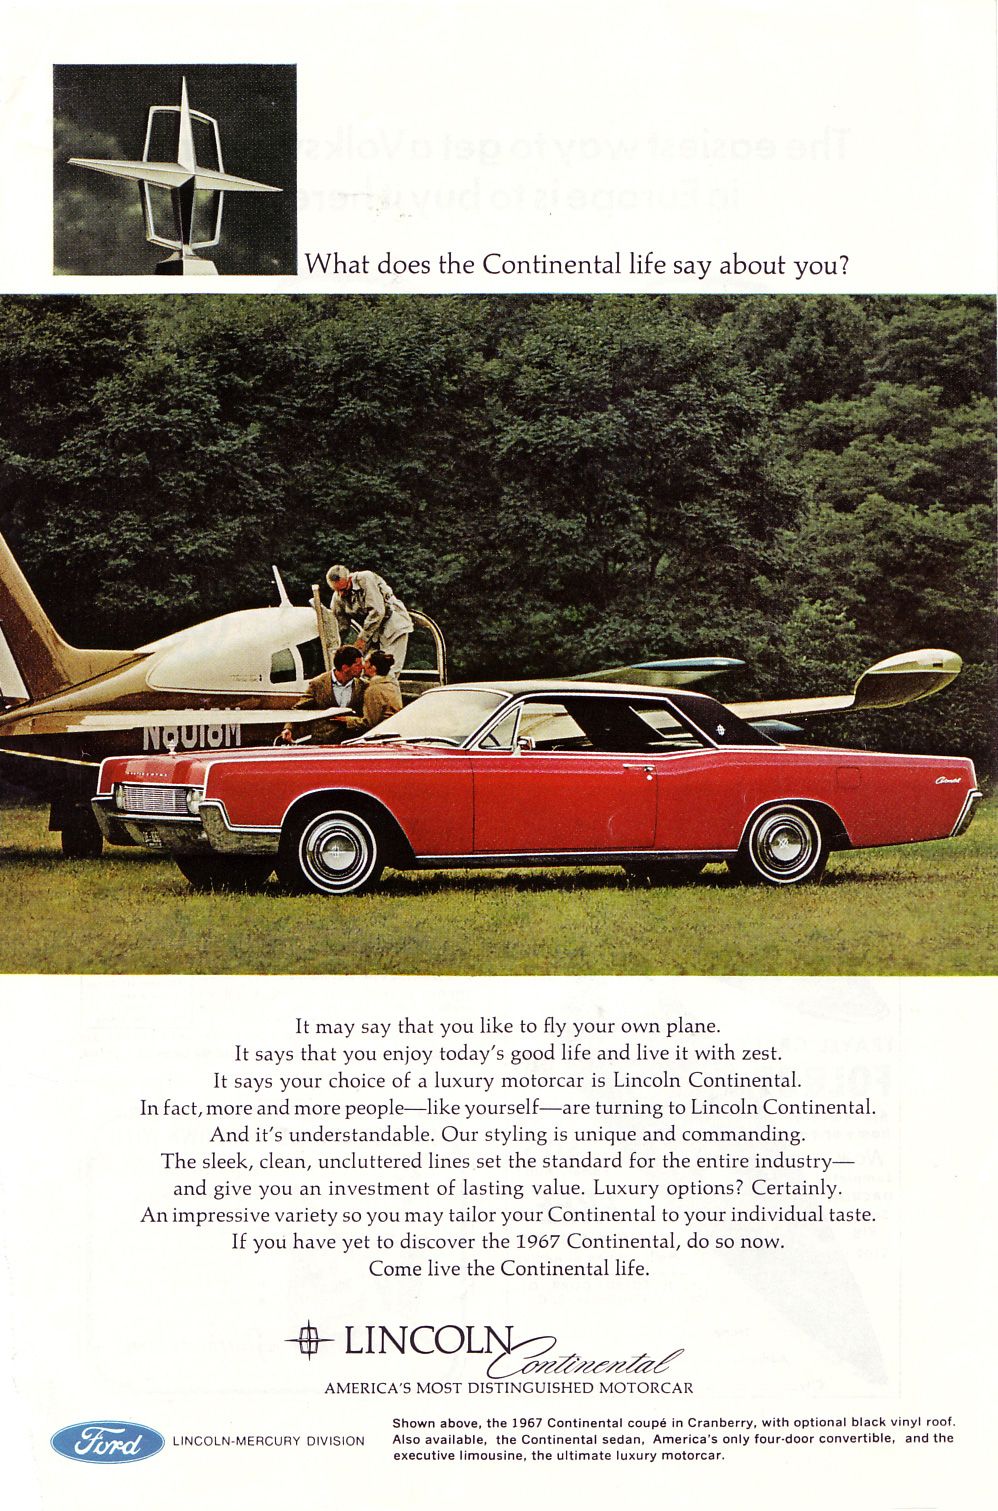 1967 Lincoln Auto Advertising